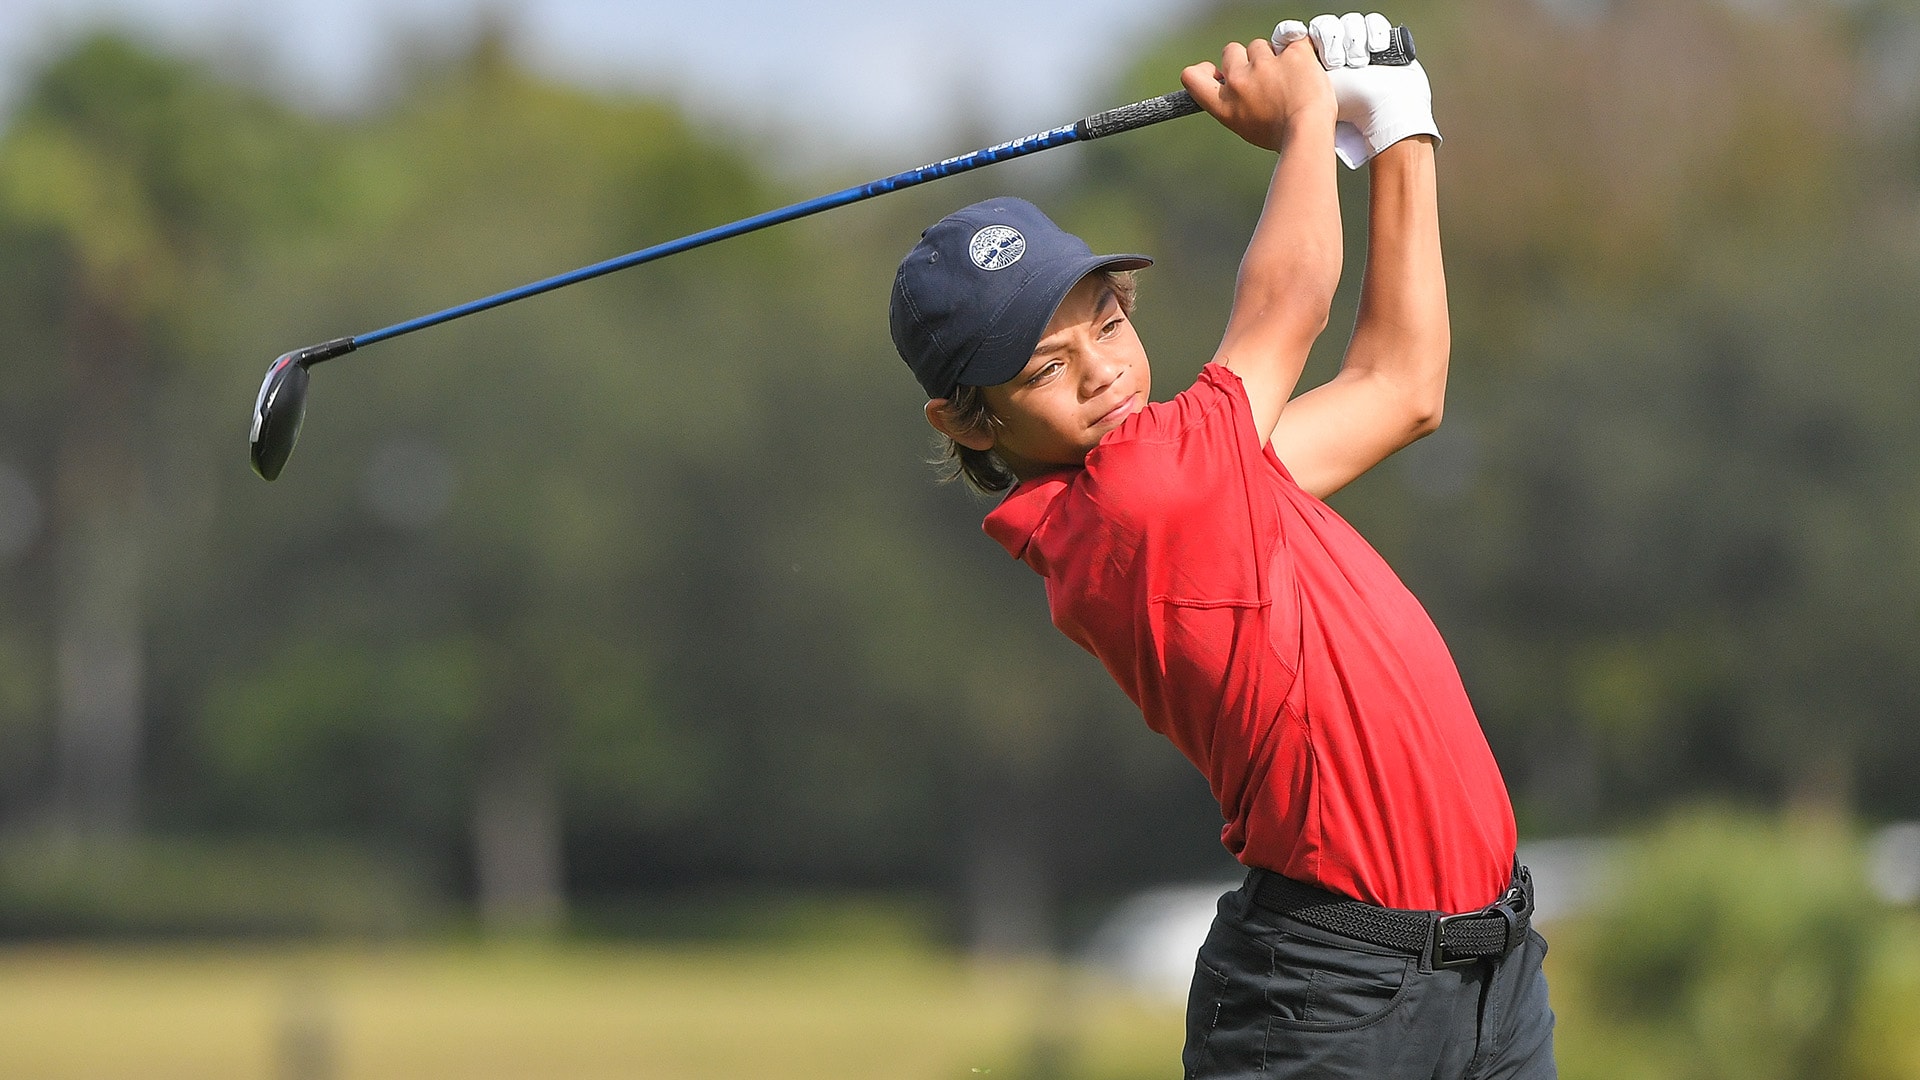 Tiger Woods tells son, Charlie, to copy Rory McIlroy’s swing instead of his own